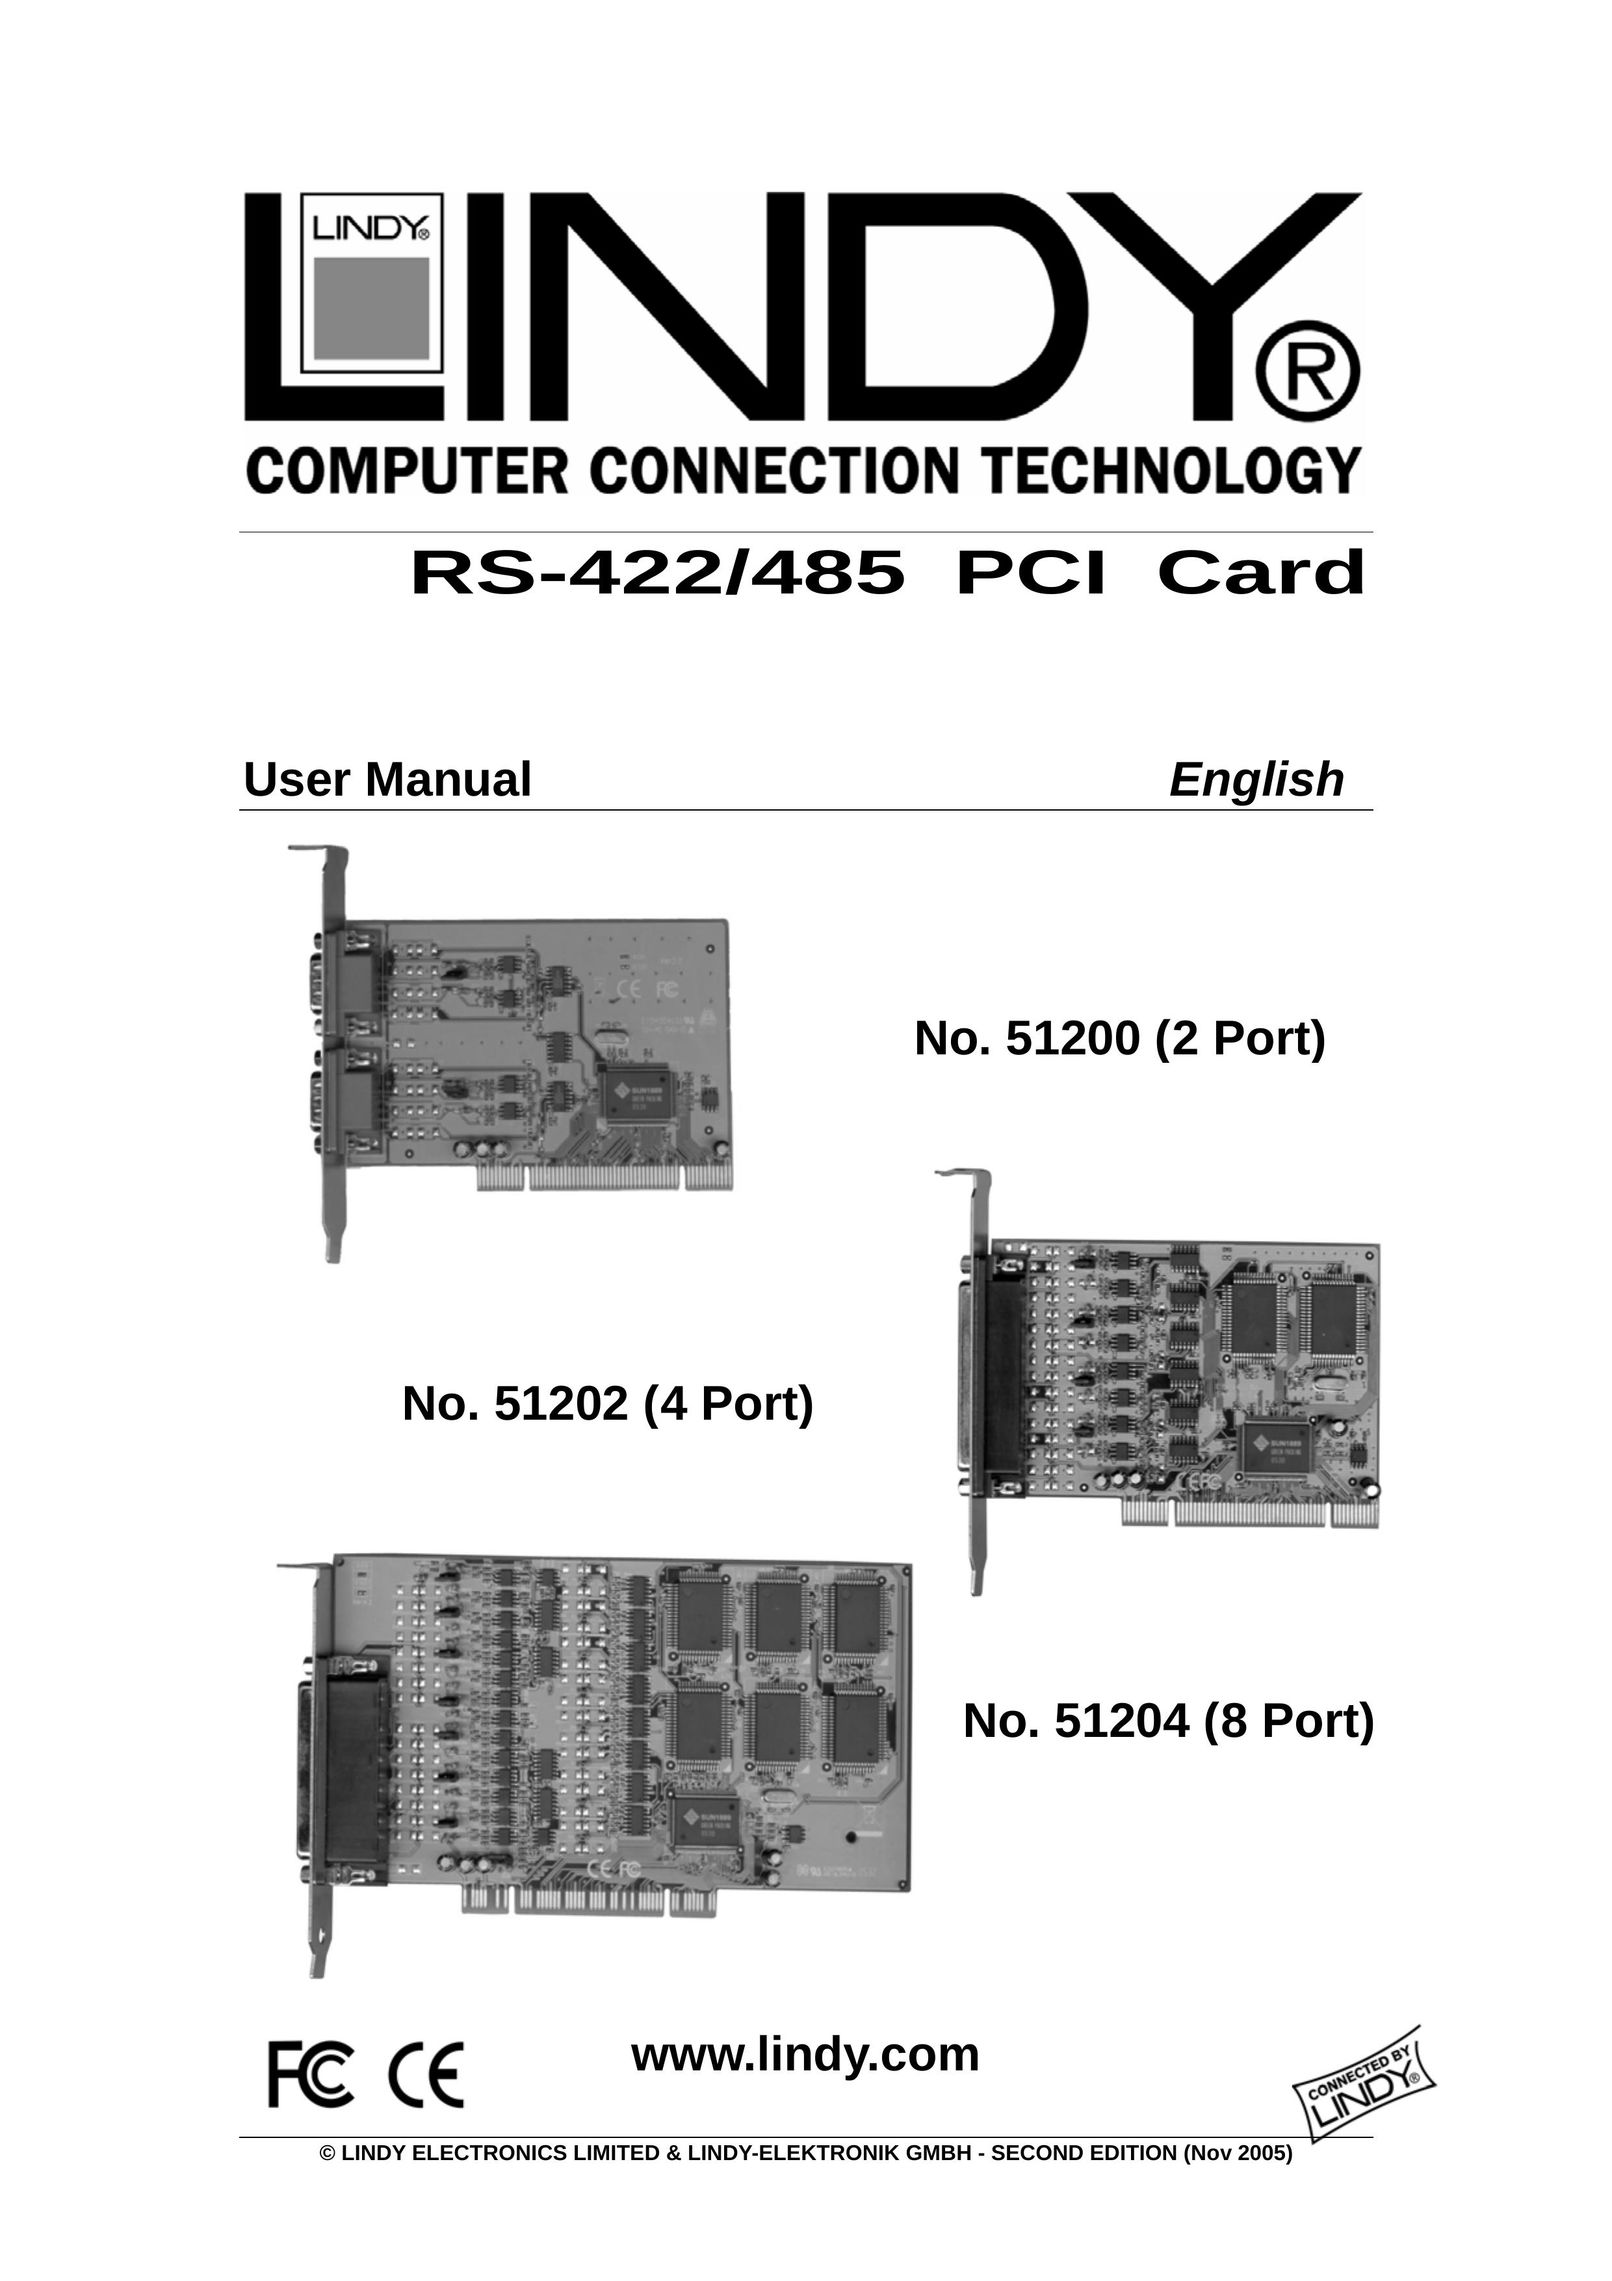 Lindy RS-422/485 Computer Hardware User Manual